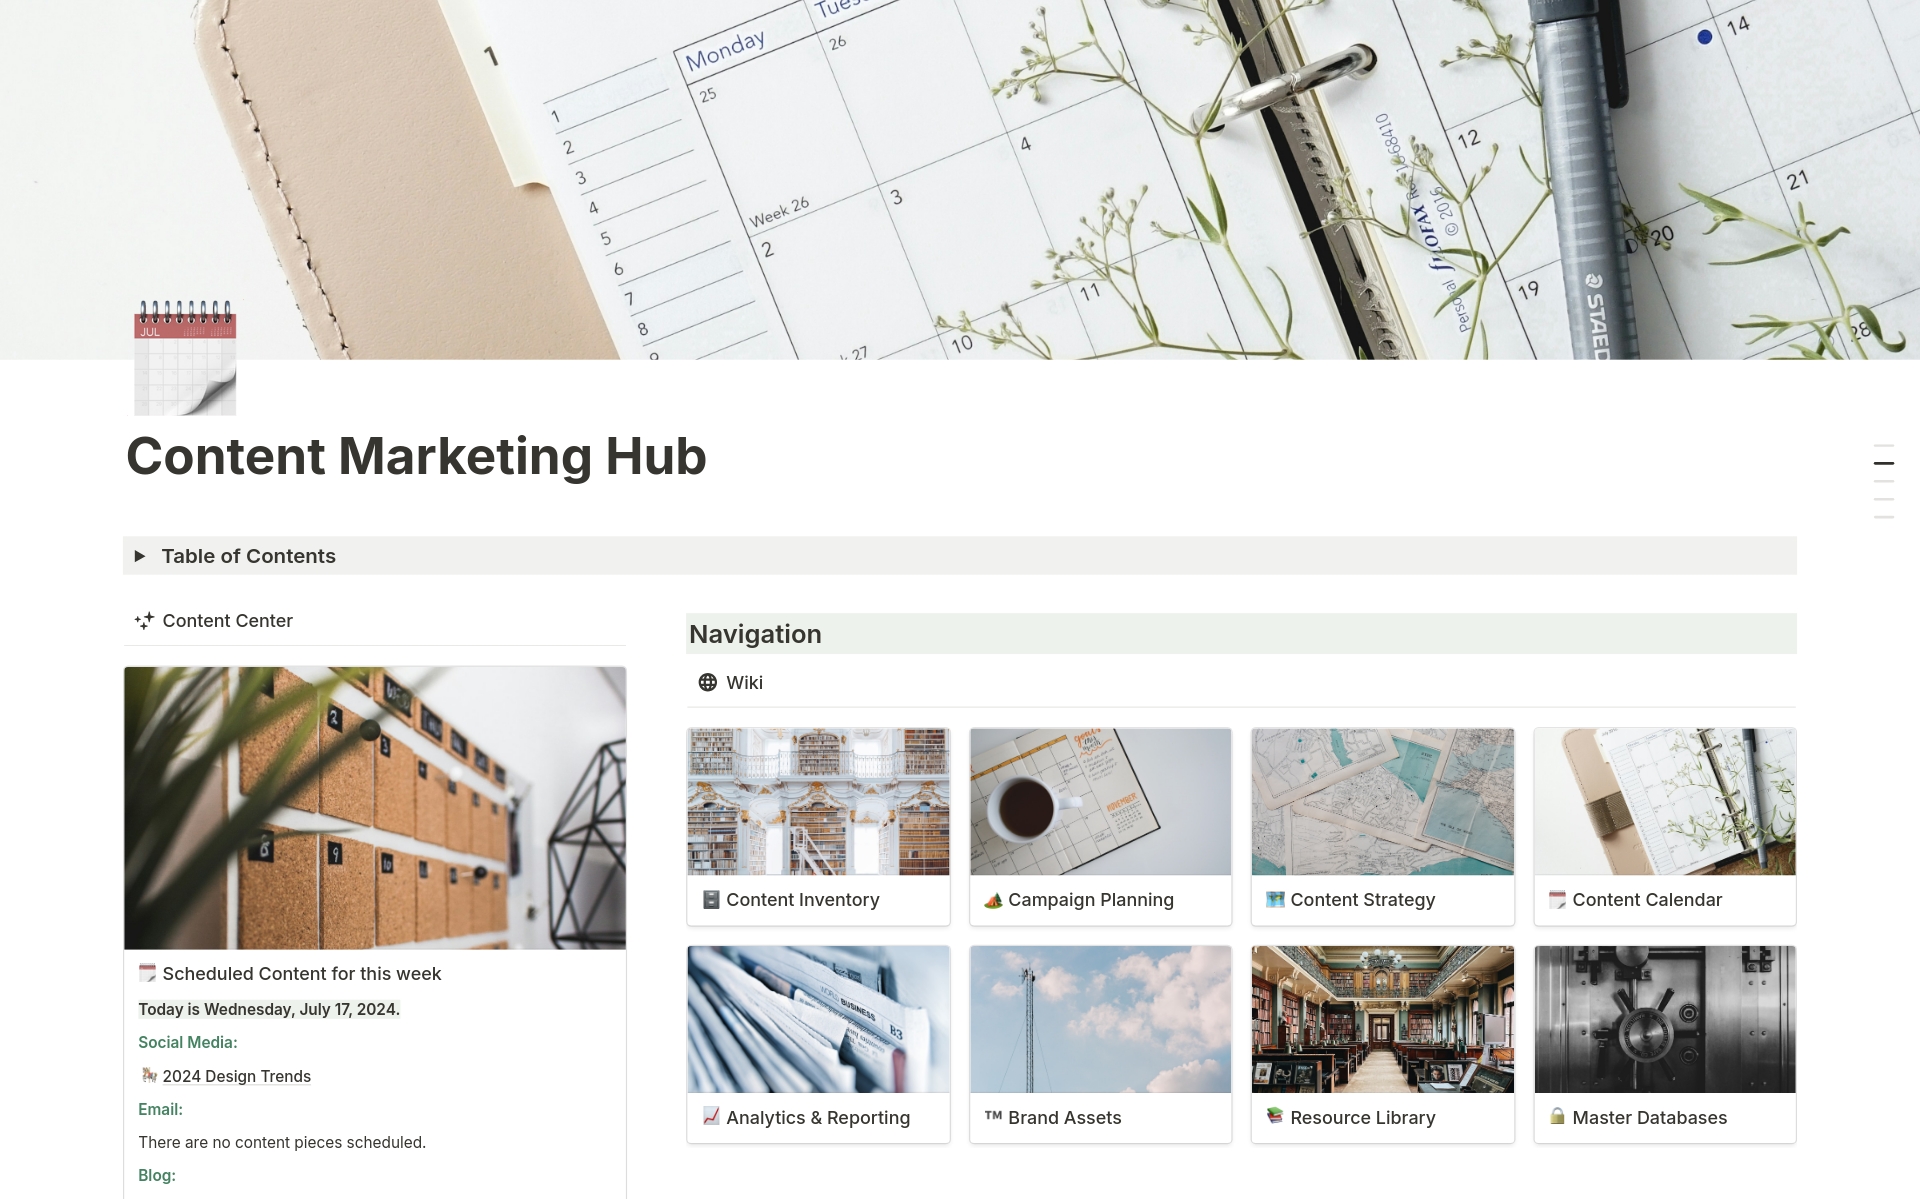 Streamline content creation and plan effortlessly with this Content Marketing Hub - with a Content Center! Perfect for content creators and small businesses, simplify your marketing strategy from planning to execution! Easily track content with 15 databases & 8 dashboards.